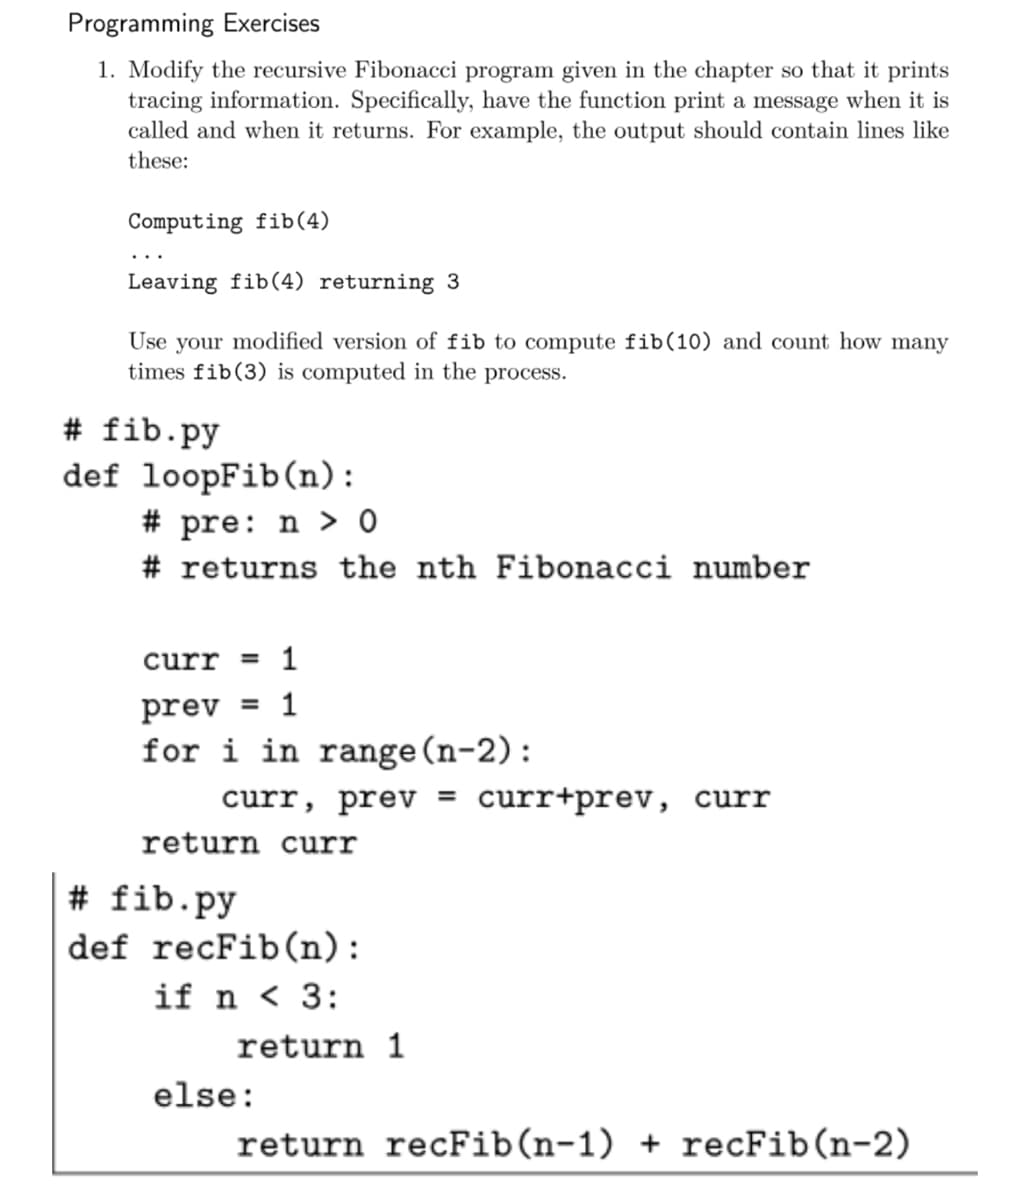 Programming Exercises
1. Modify the recursive Fibonacci program given in the chapter so that it prints
tracing information. Specifically, have the function print a message when it is
called and when it returns. For example, the output should contain lines like
these:
Computing fib(4)
Leaving fib(4) returning 3
Use your modified version of fib to compute fib(10) and count how many
times fib(3) is computed in the process.
# fib.py
def loopFib(n):
# pre: n > 0
# returns the nth Fibonacci number
curr = 1
prev = 1
for i in range (n-2):
curr, prev = curr+prev, curr
return curr
# fib.py
def recFib(n):
if n < 3:
return 1
else:
return recFib(n-1) + recFib(n-2)
